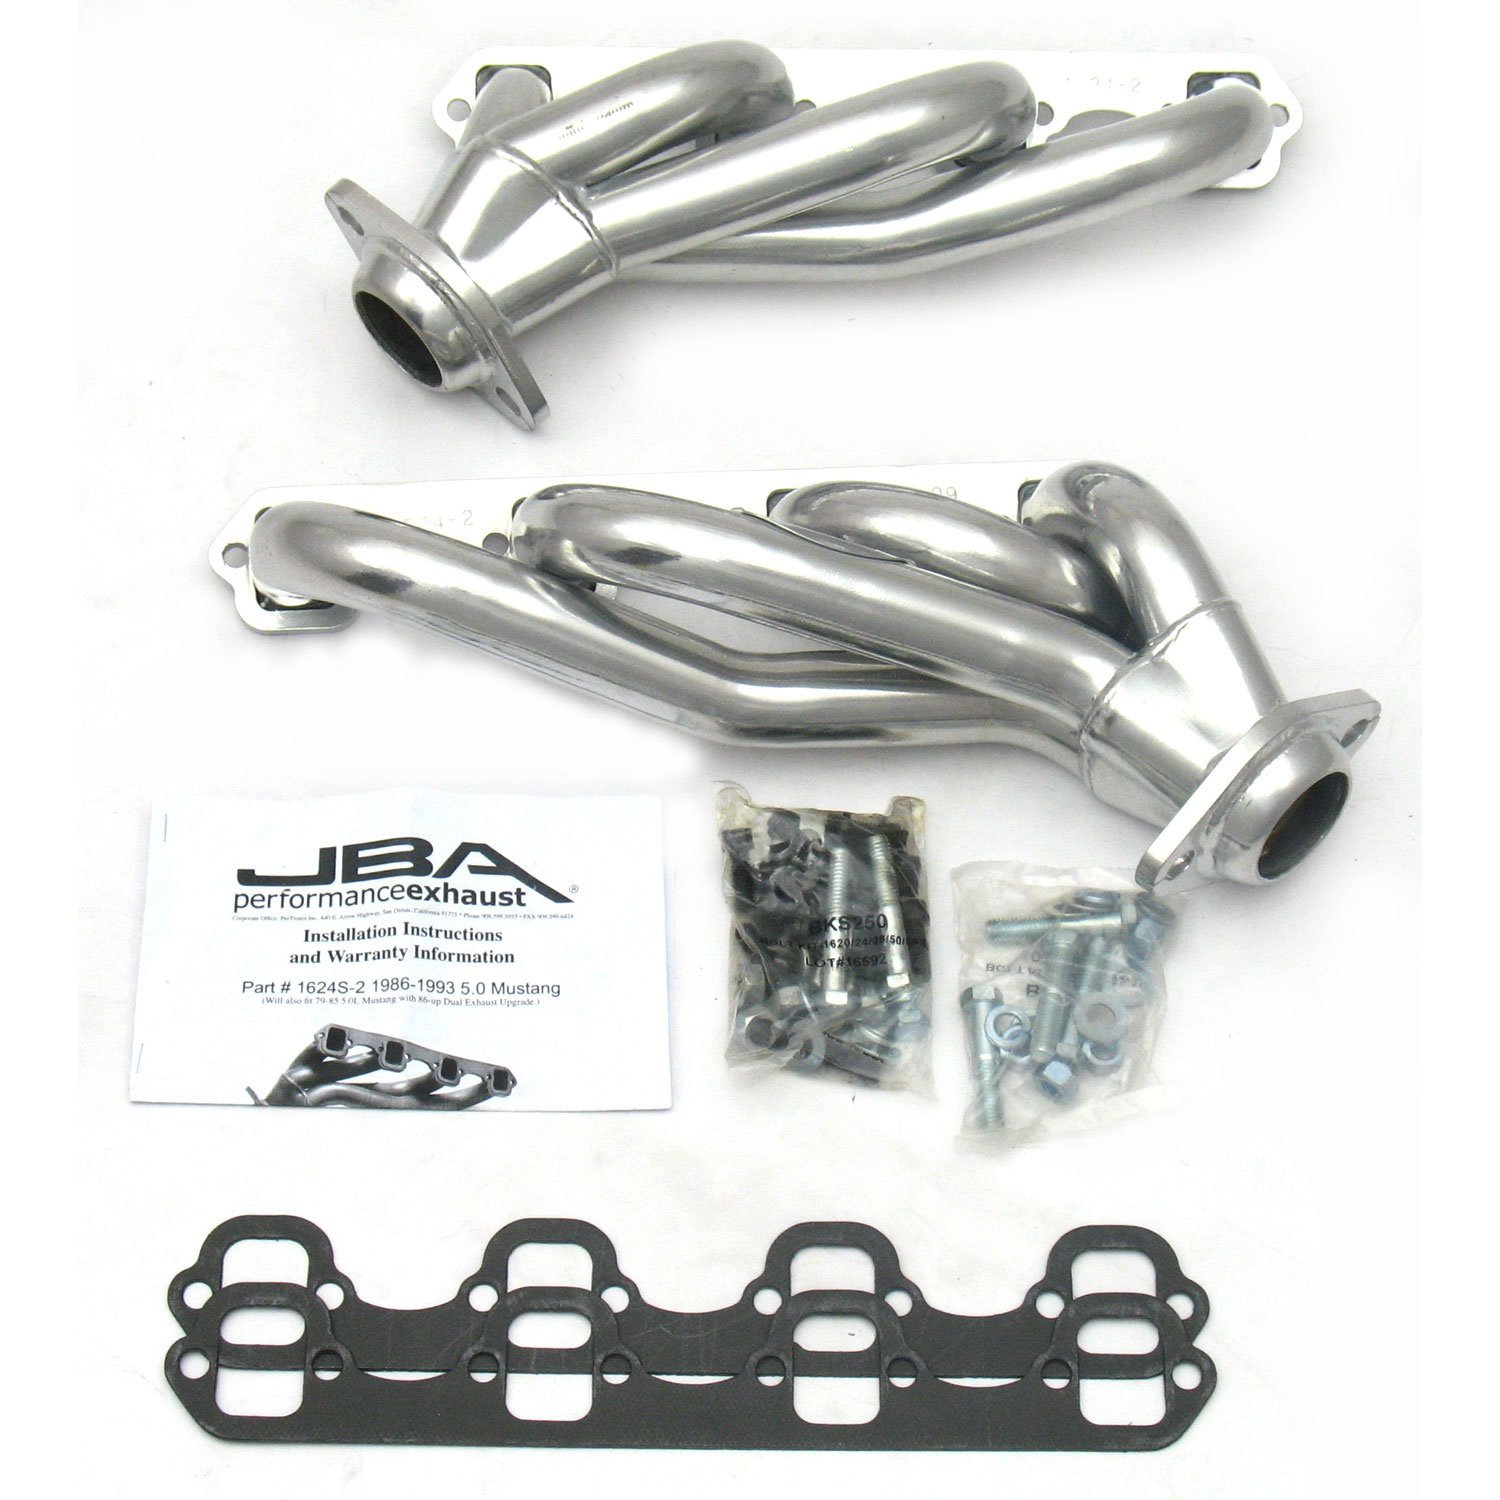 1-5/8" Shorty Headers 1986-1993 Lincoln Mark VII/Mustang GT/LX 5.0L